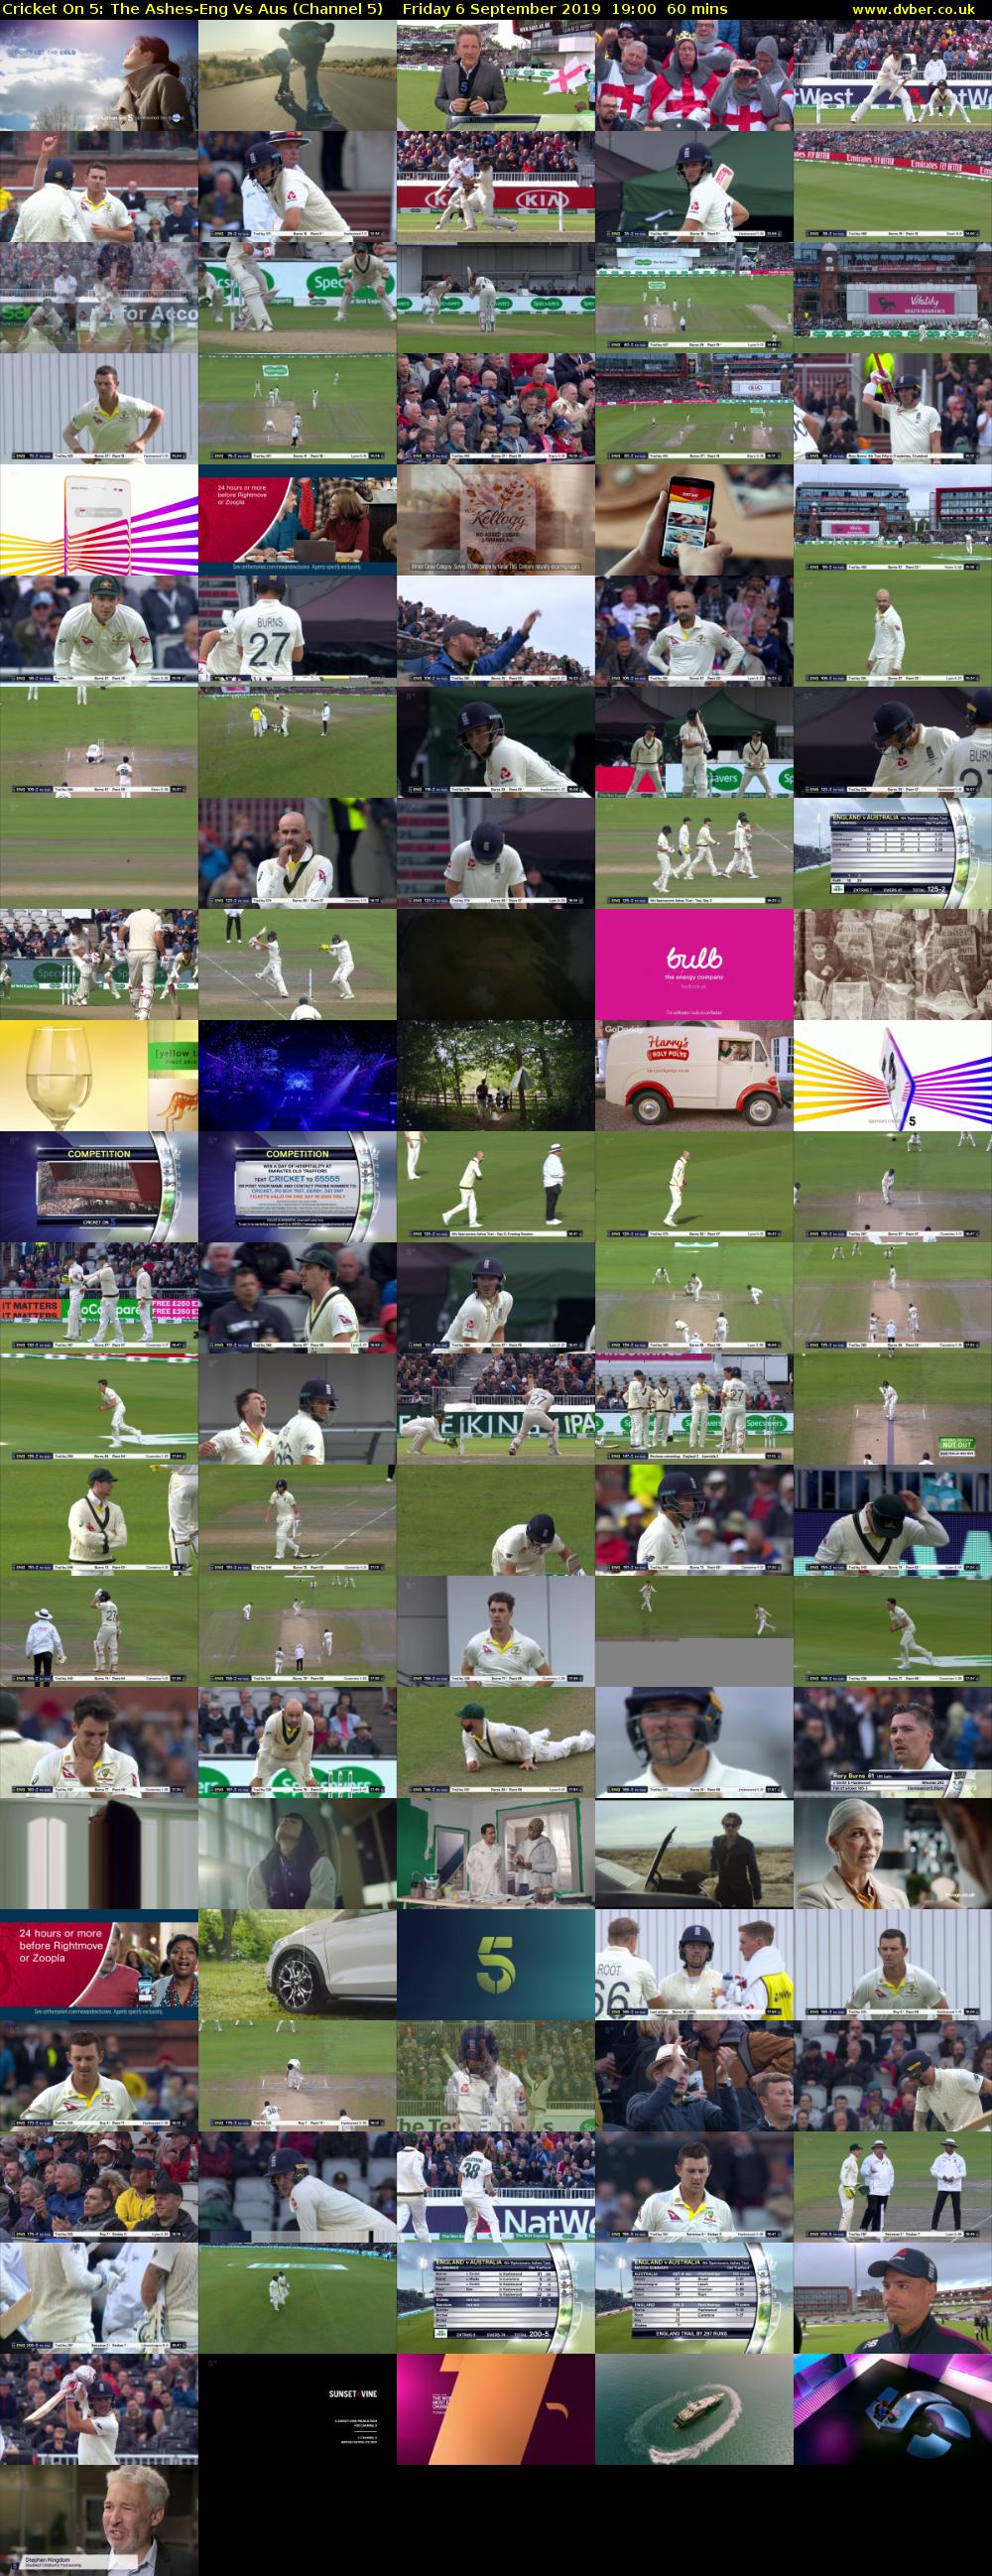 Cricket On 5: The Ashes-Eng Vs Aus (Channel 5) Friday 6 September 2019 19:00 - 20:00